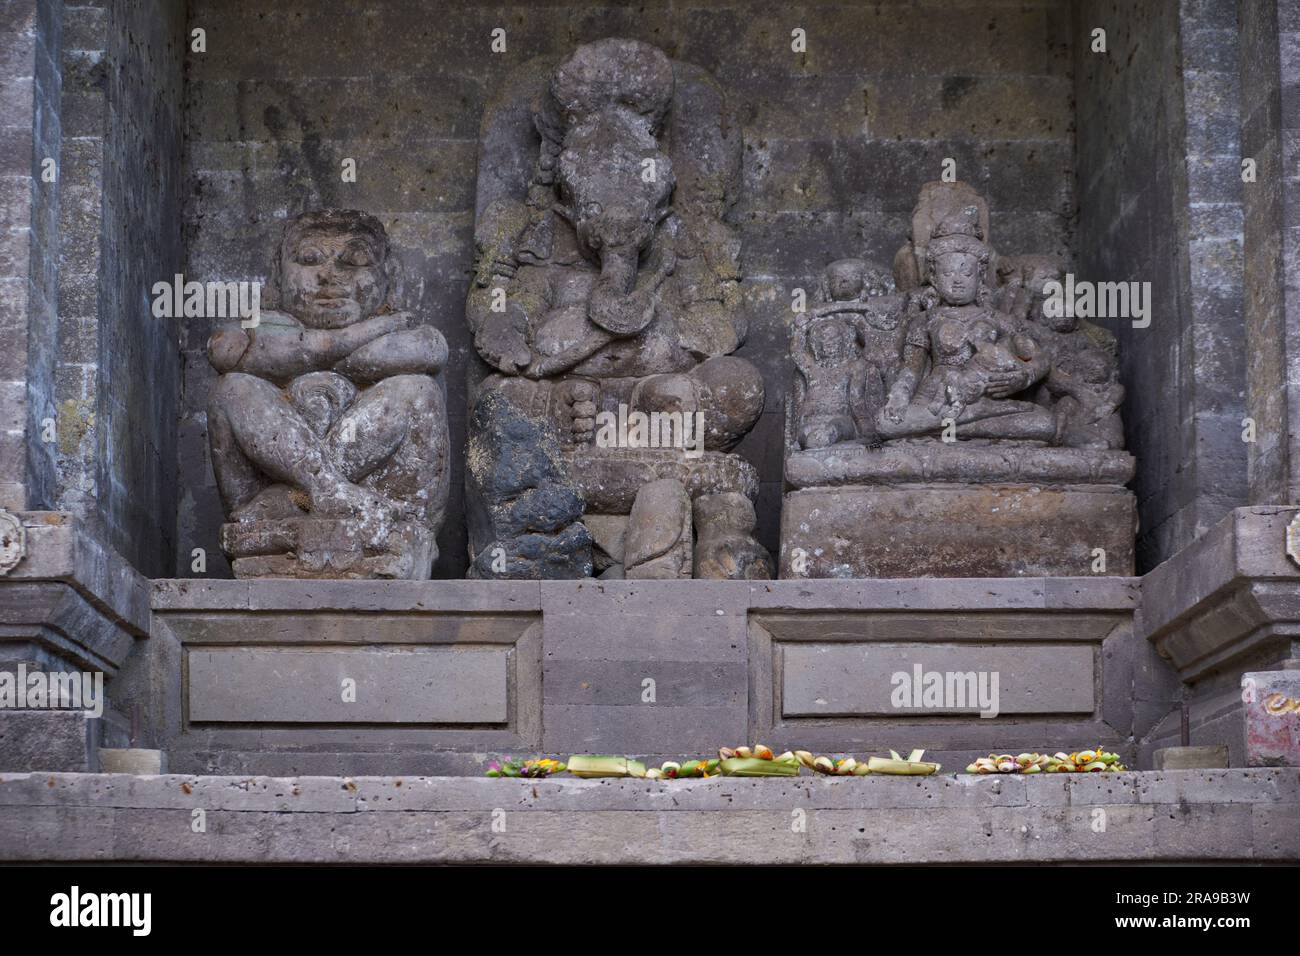 Budha and Ganesha Relic inside Goa Gajah or Elephant Cave   located on island of Bali near Ubud, in Indonesia. Built in the 9th century. Stock Photo